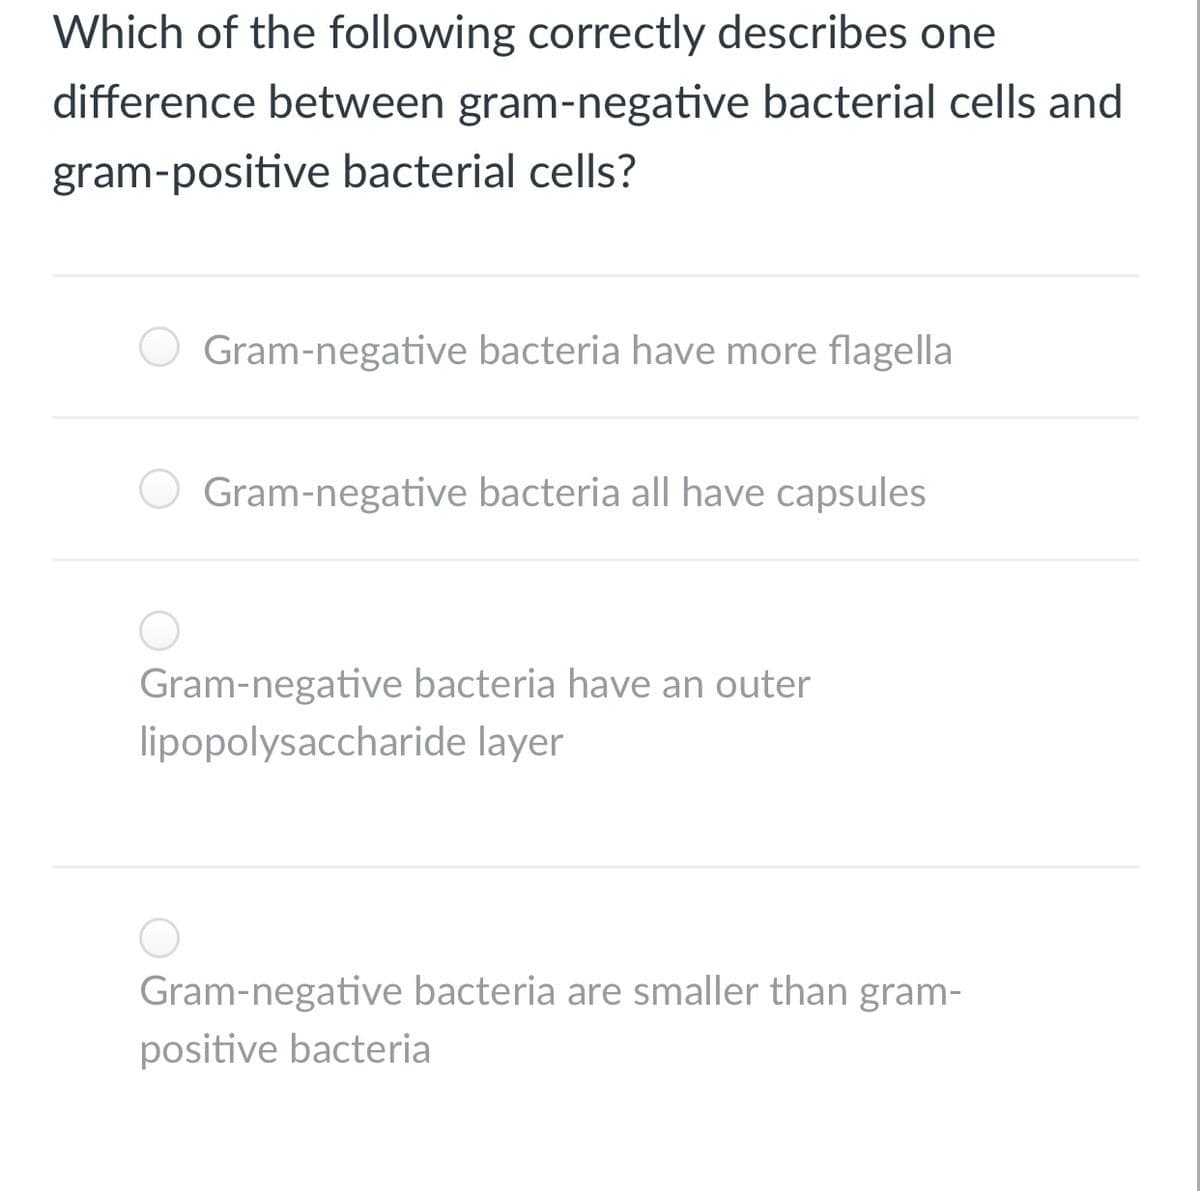 Which of the following correctly describes one
difference between gram-negative bacterial cells and
gram-positive bacterial cells?
Gram-negative bacteria have more flagella
Gram-negative bacteria all have capsules
Gram-negative bacteria have an outer
lipopolysaccharide layer
Gram-negative bacteria are smaller than gram-
positive bacteria
